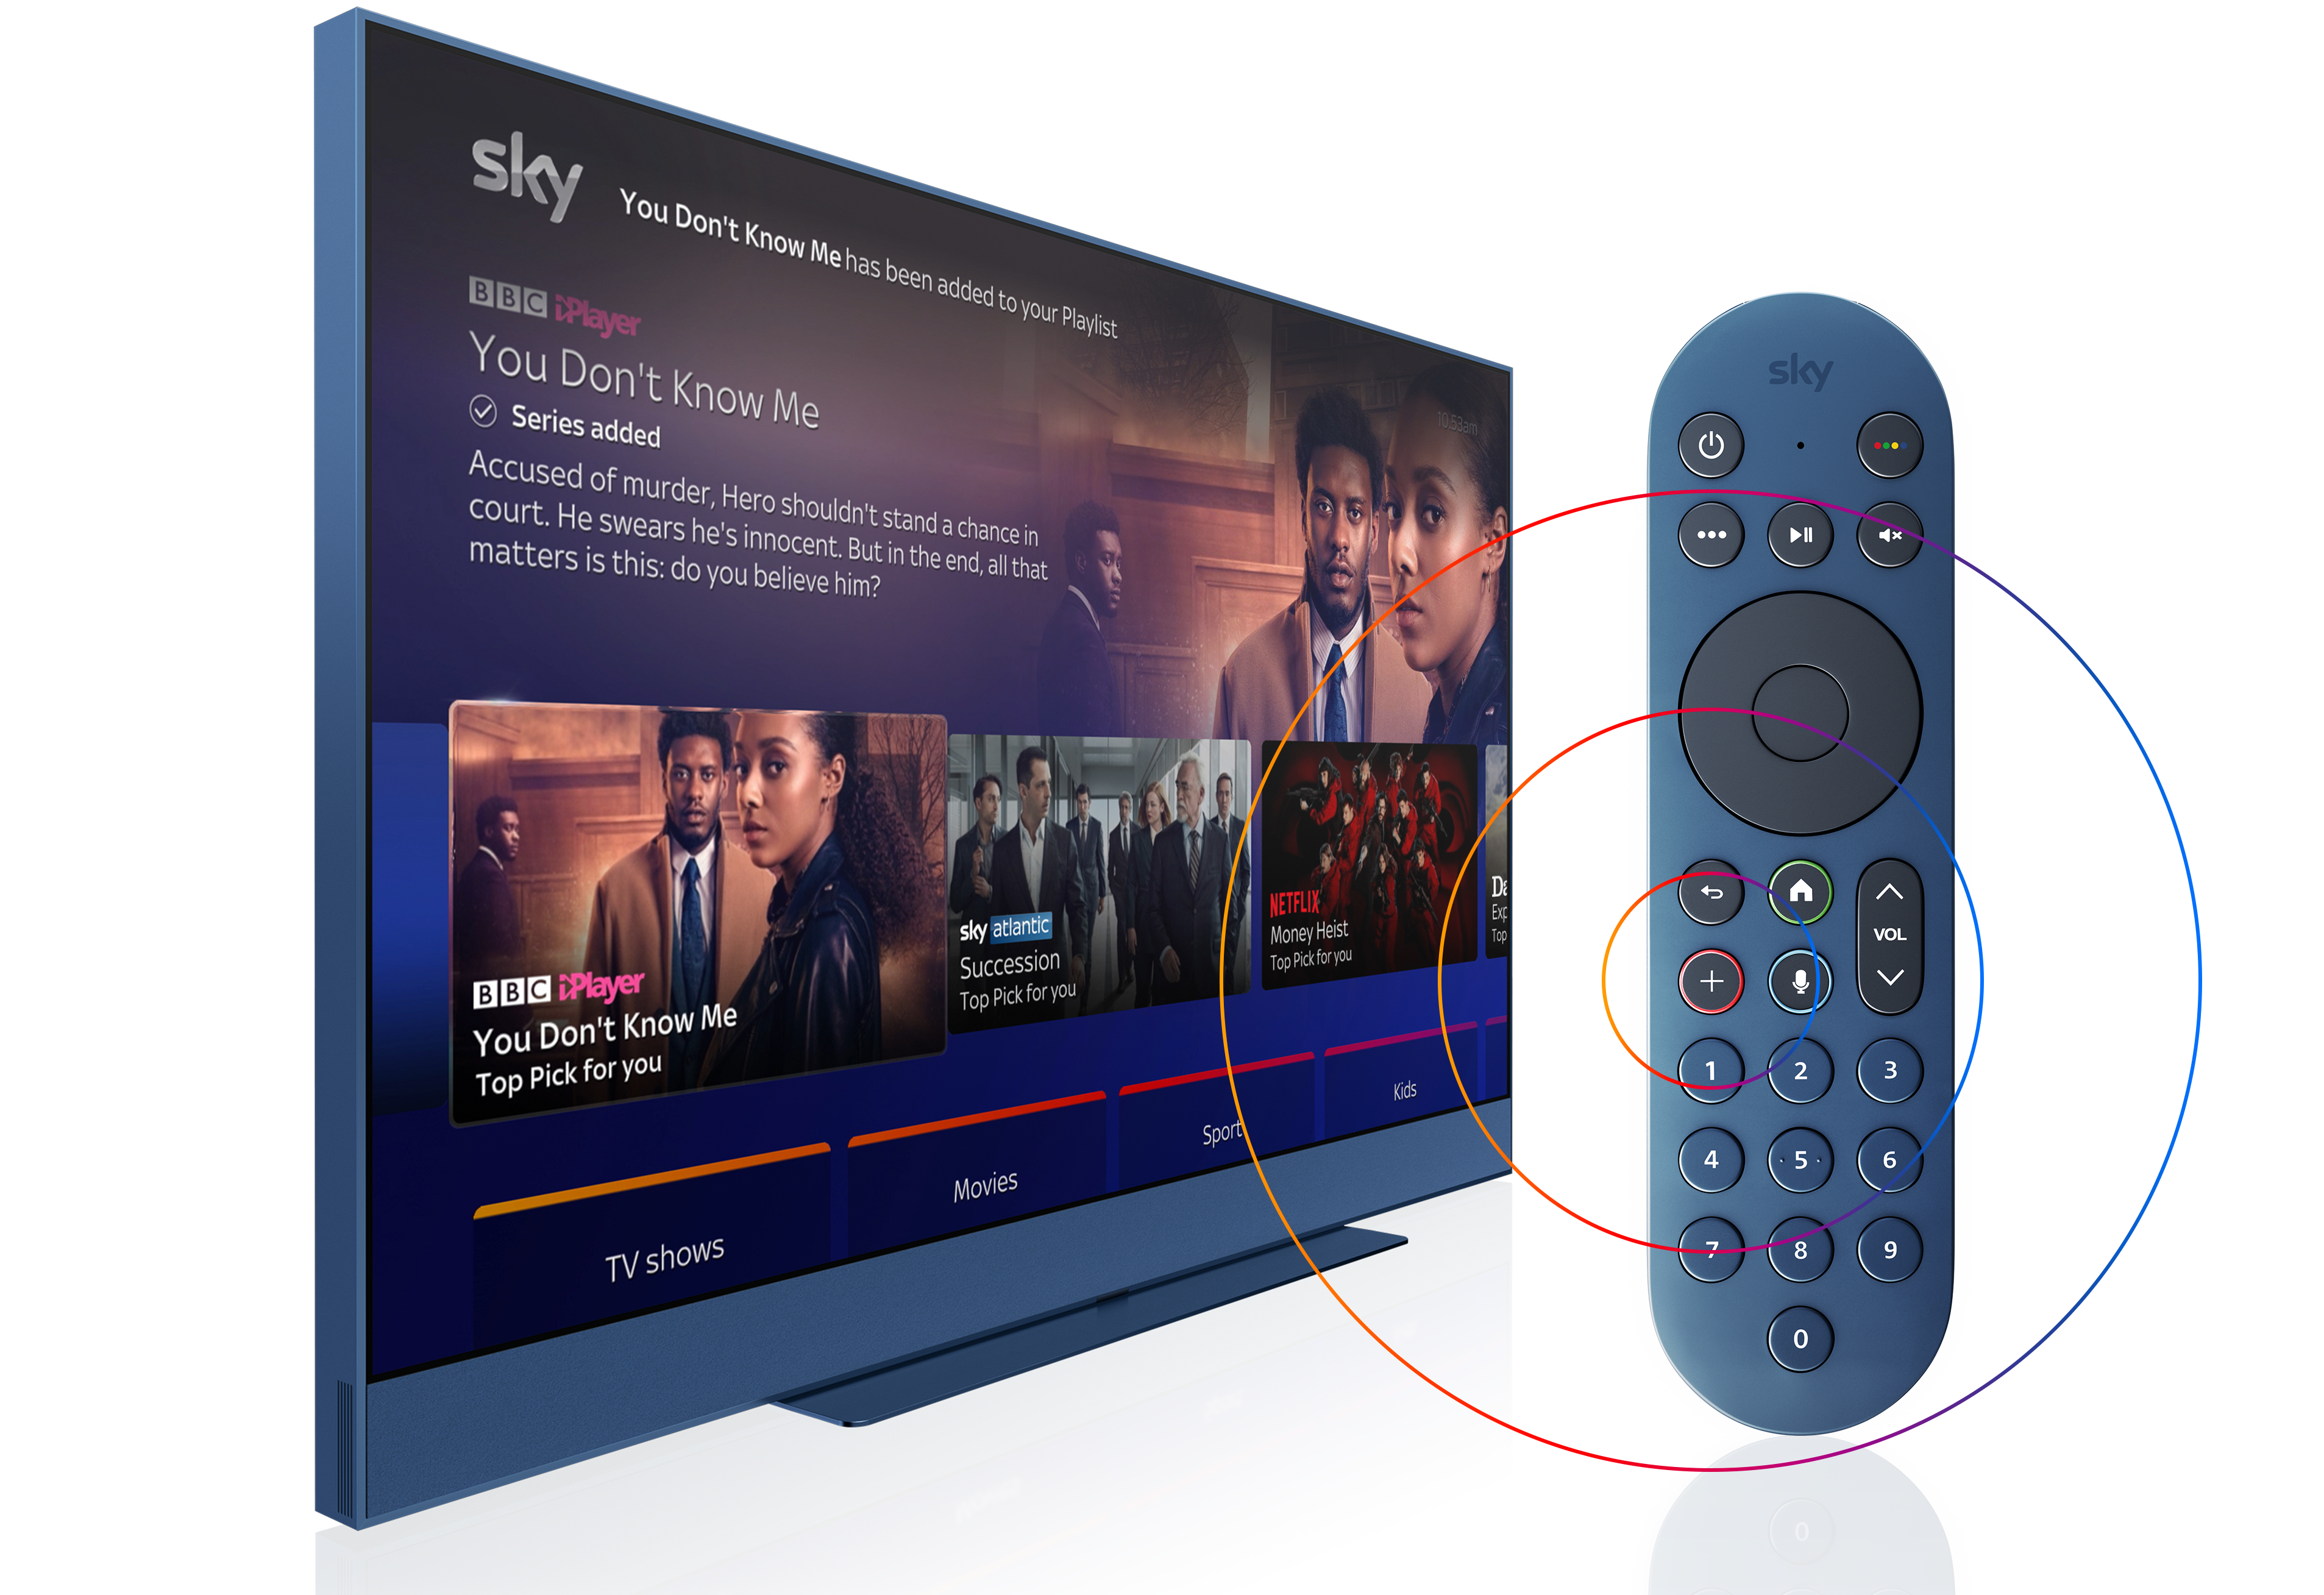 sky tv shown with playlist feature on-screen and a remote control with the + button